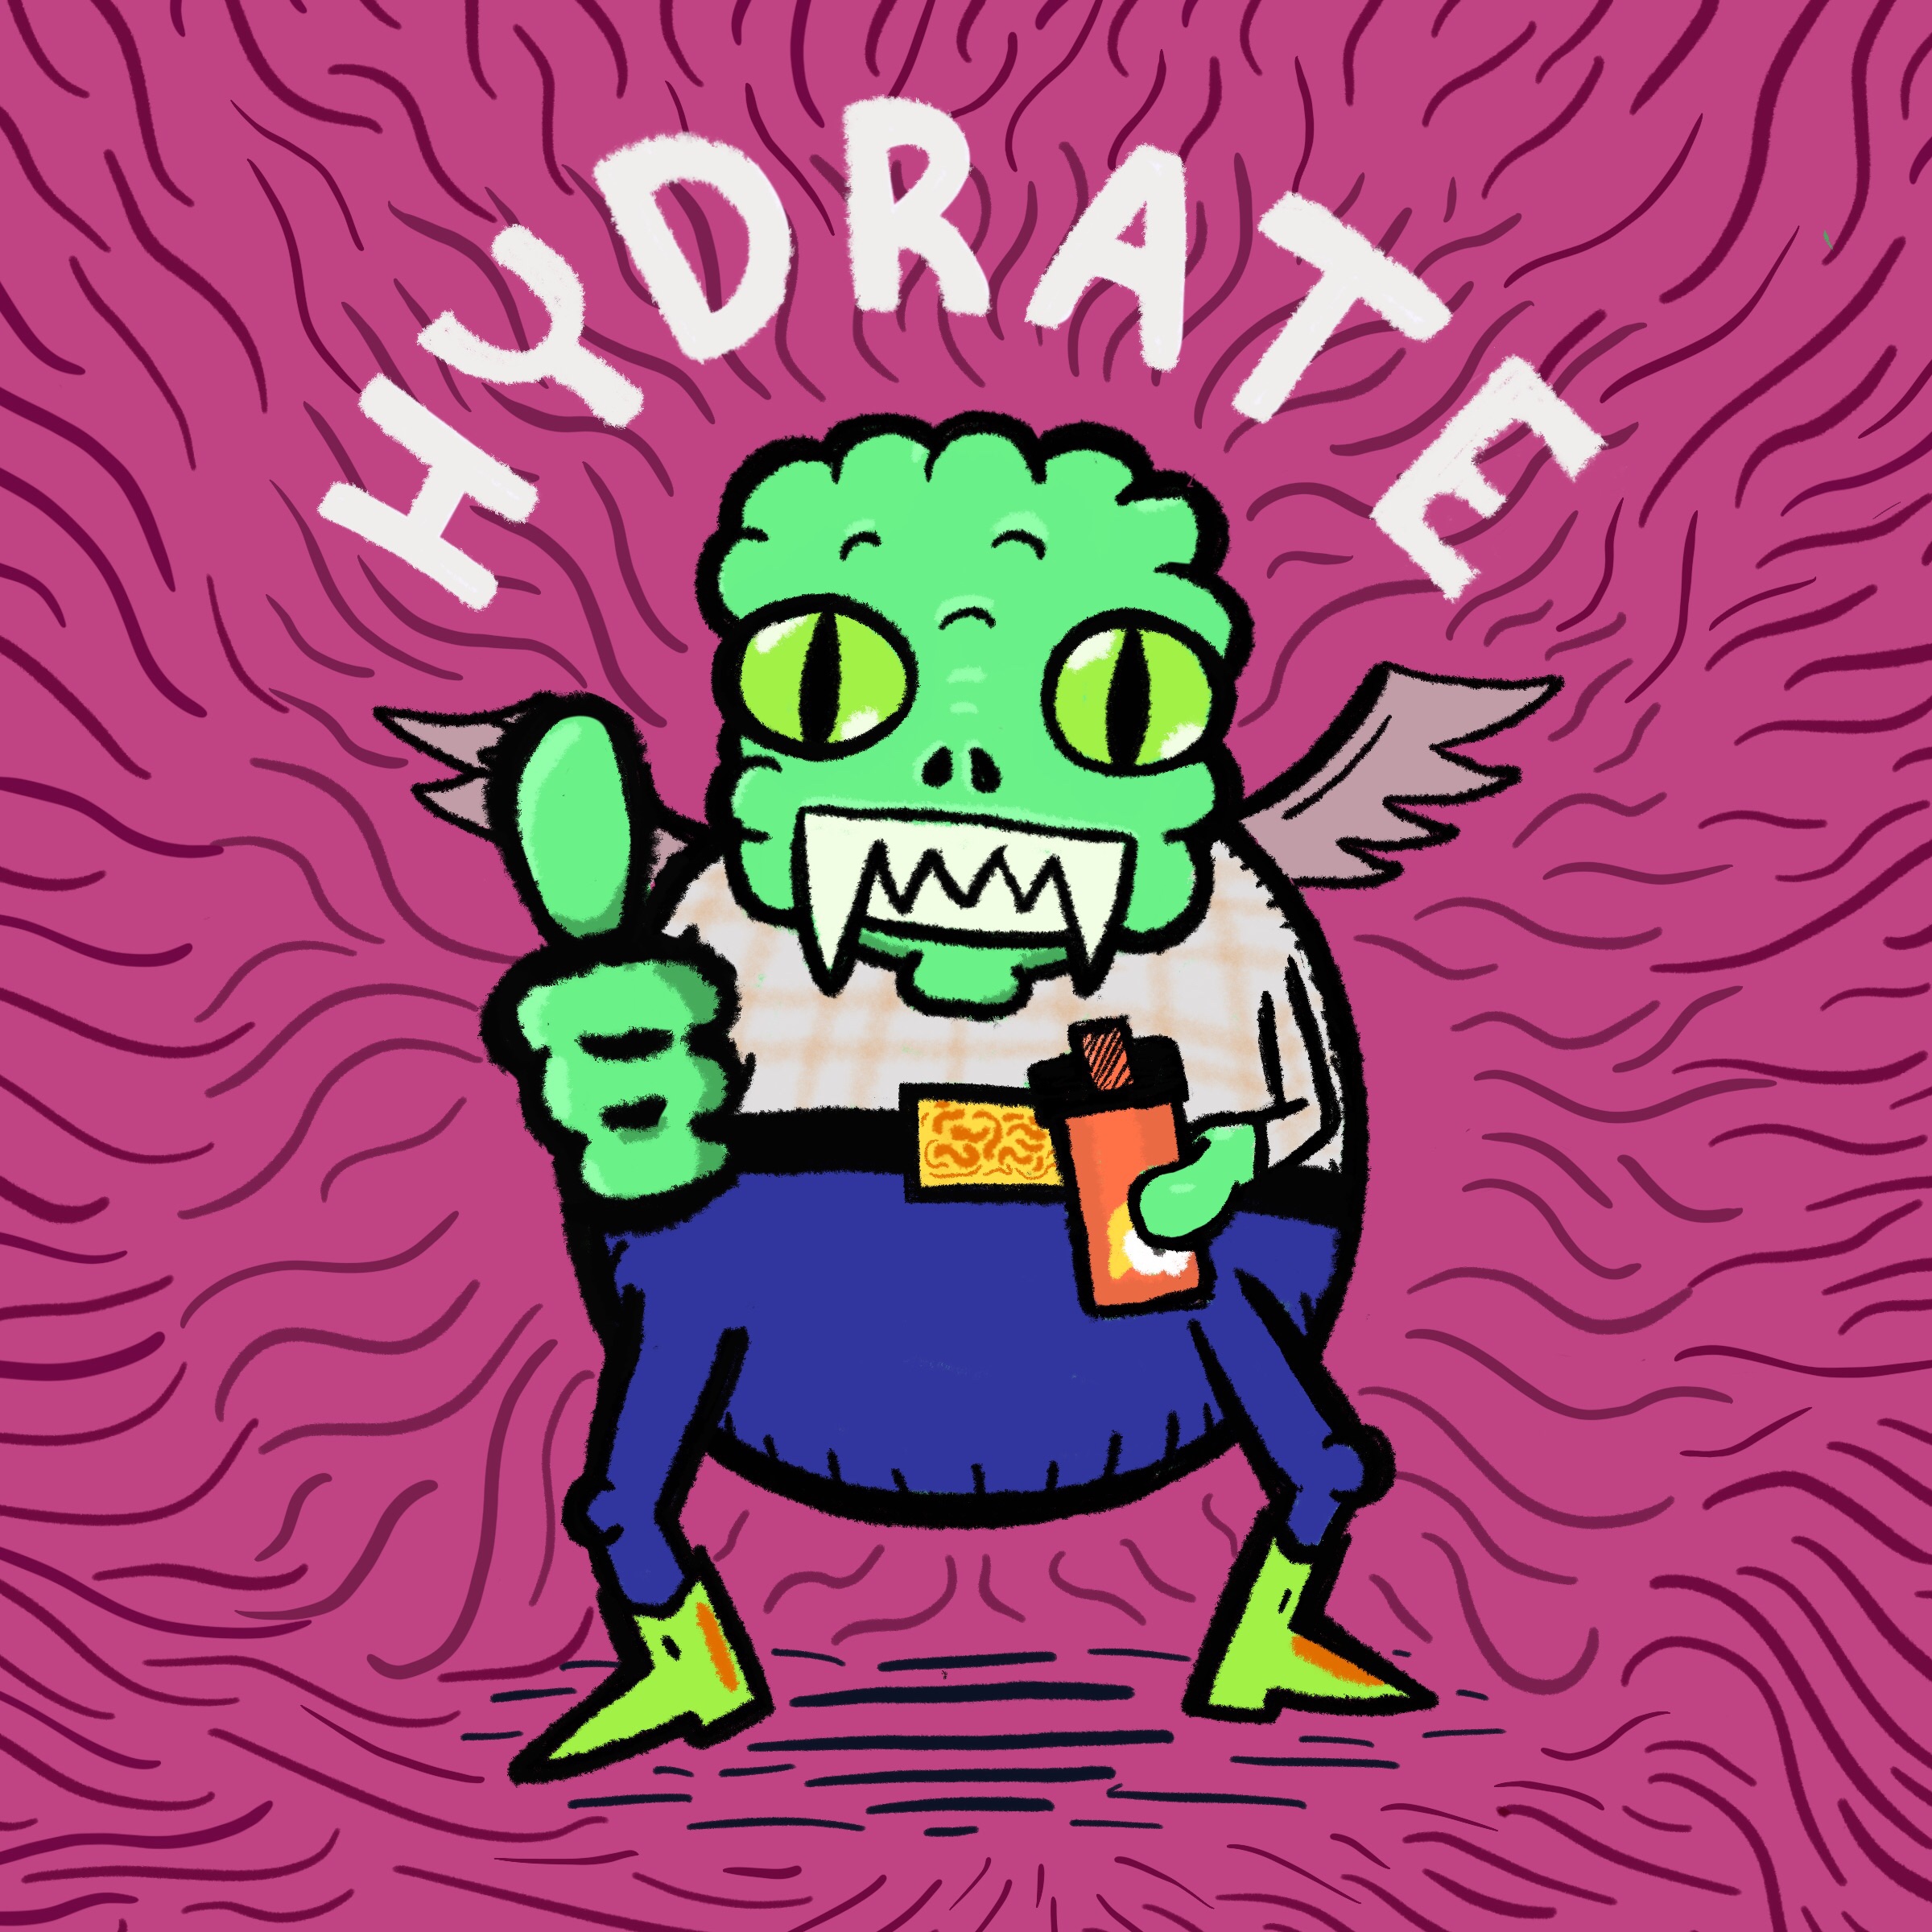 Hydrate! It's hot out there!